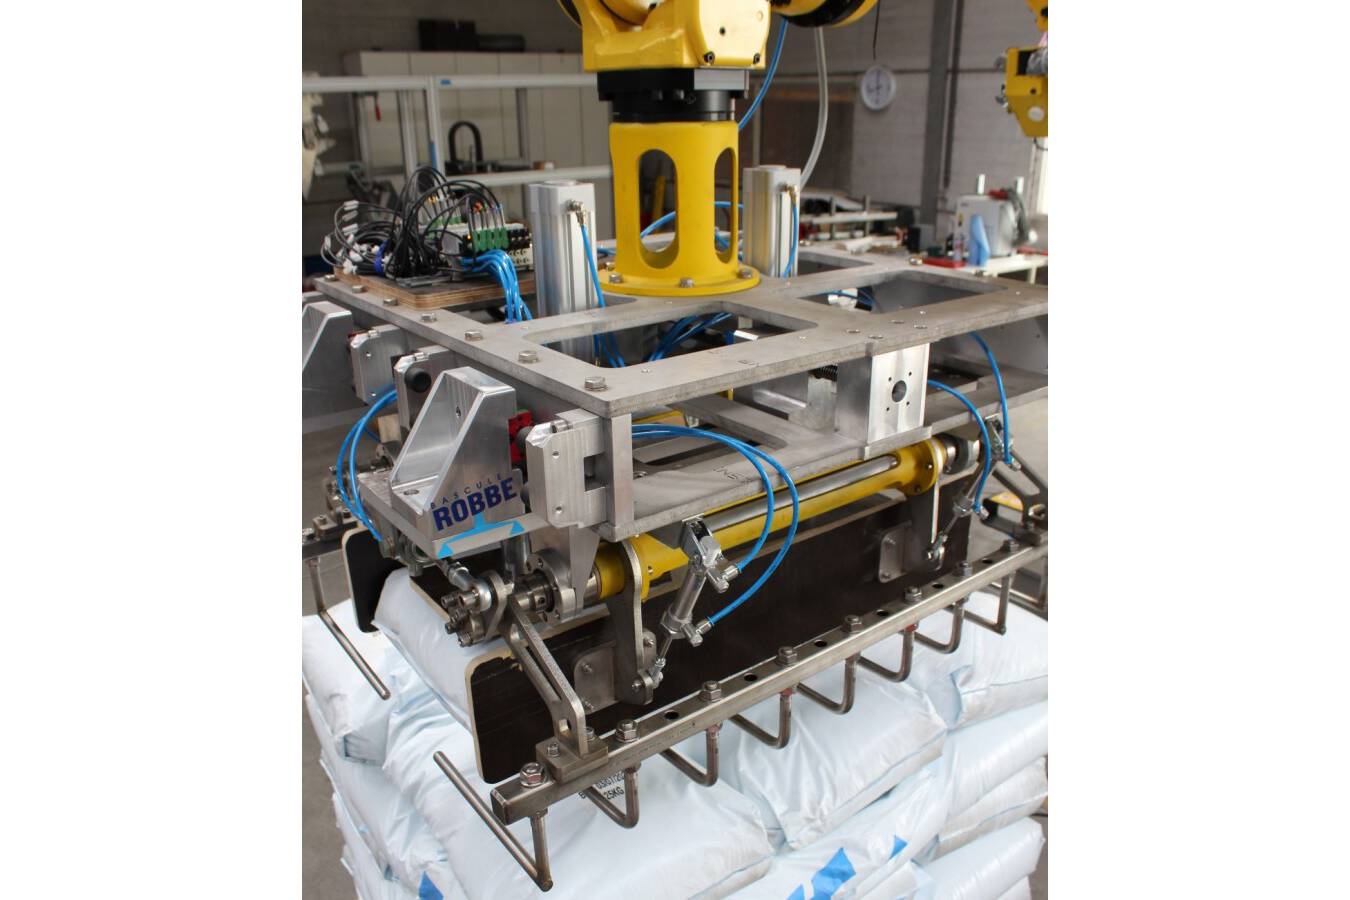 Palletizing robot. Via 4G IIoT access of the filling and palletizing line, you can keep track of exactly how many bags were filled and stacked.